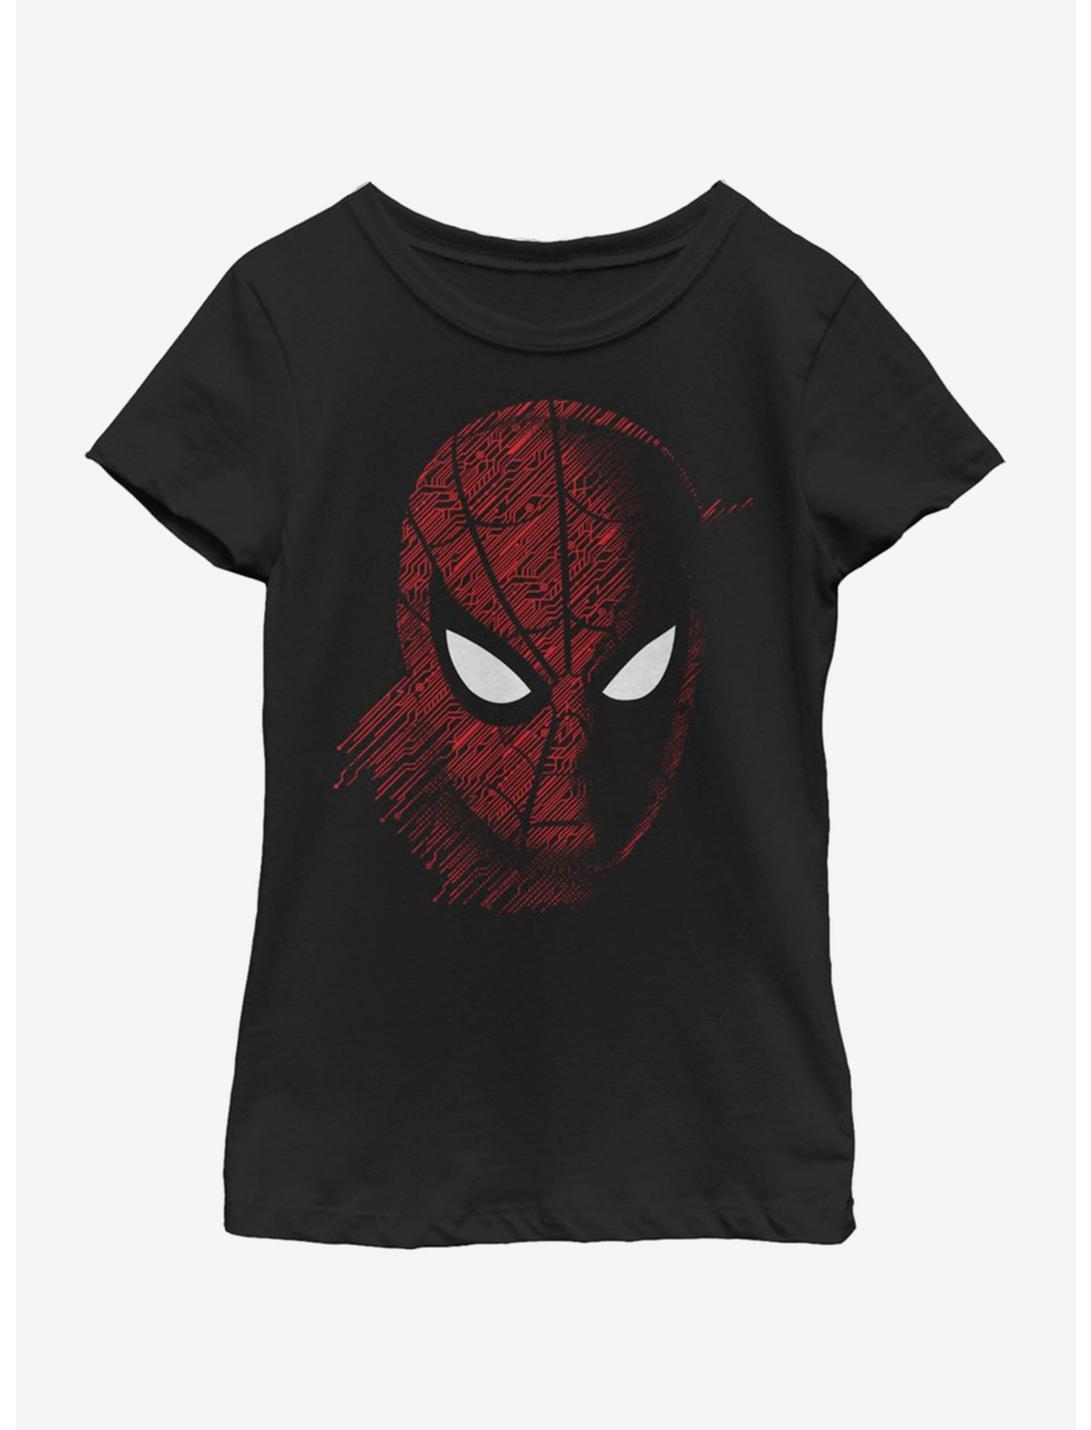 Marvel Spiderman: Far From Home Spidey Tech Portrait Youth Girls T-Shirt, BLACK, hi-res